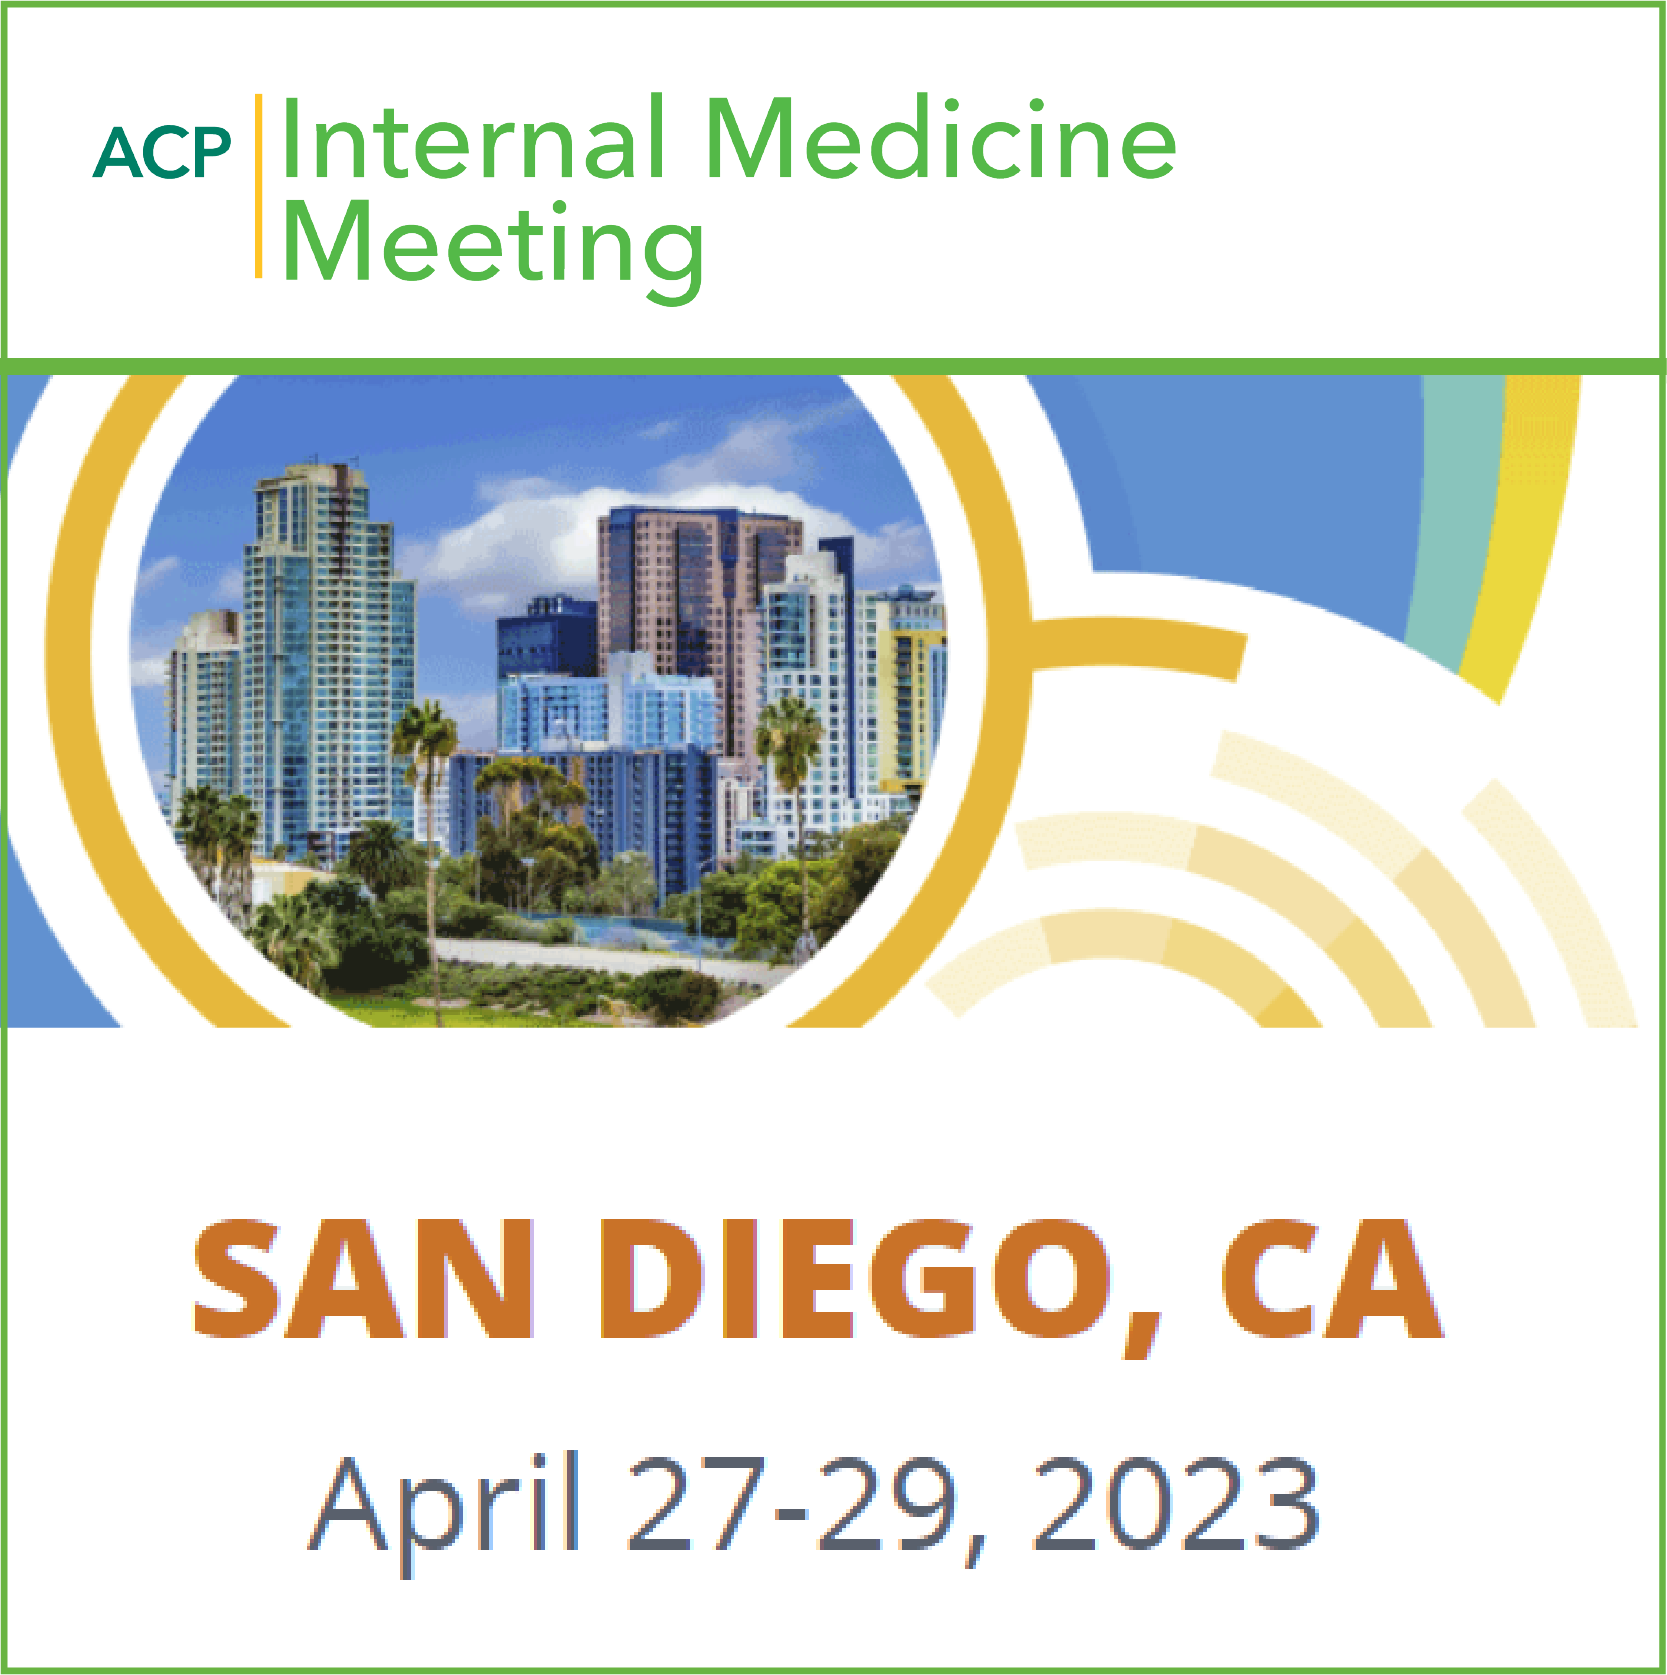 AMERICAN COLLEGE OF PHYSICIANS INTERNAL MEDICINE MEETING ACP 2023